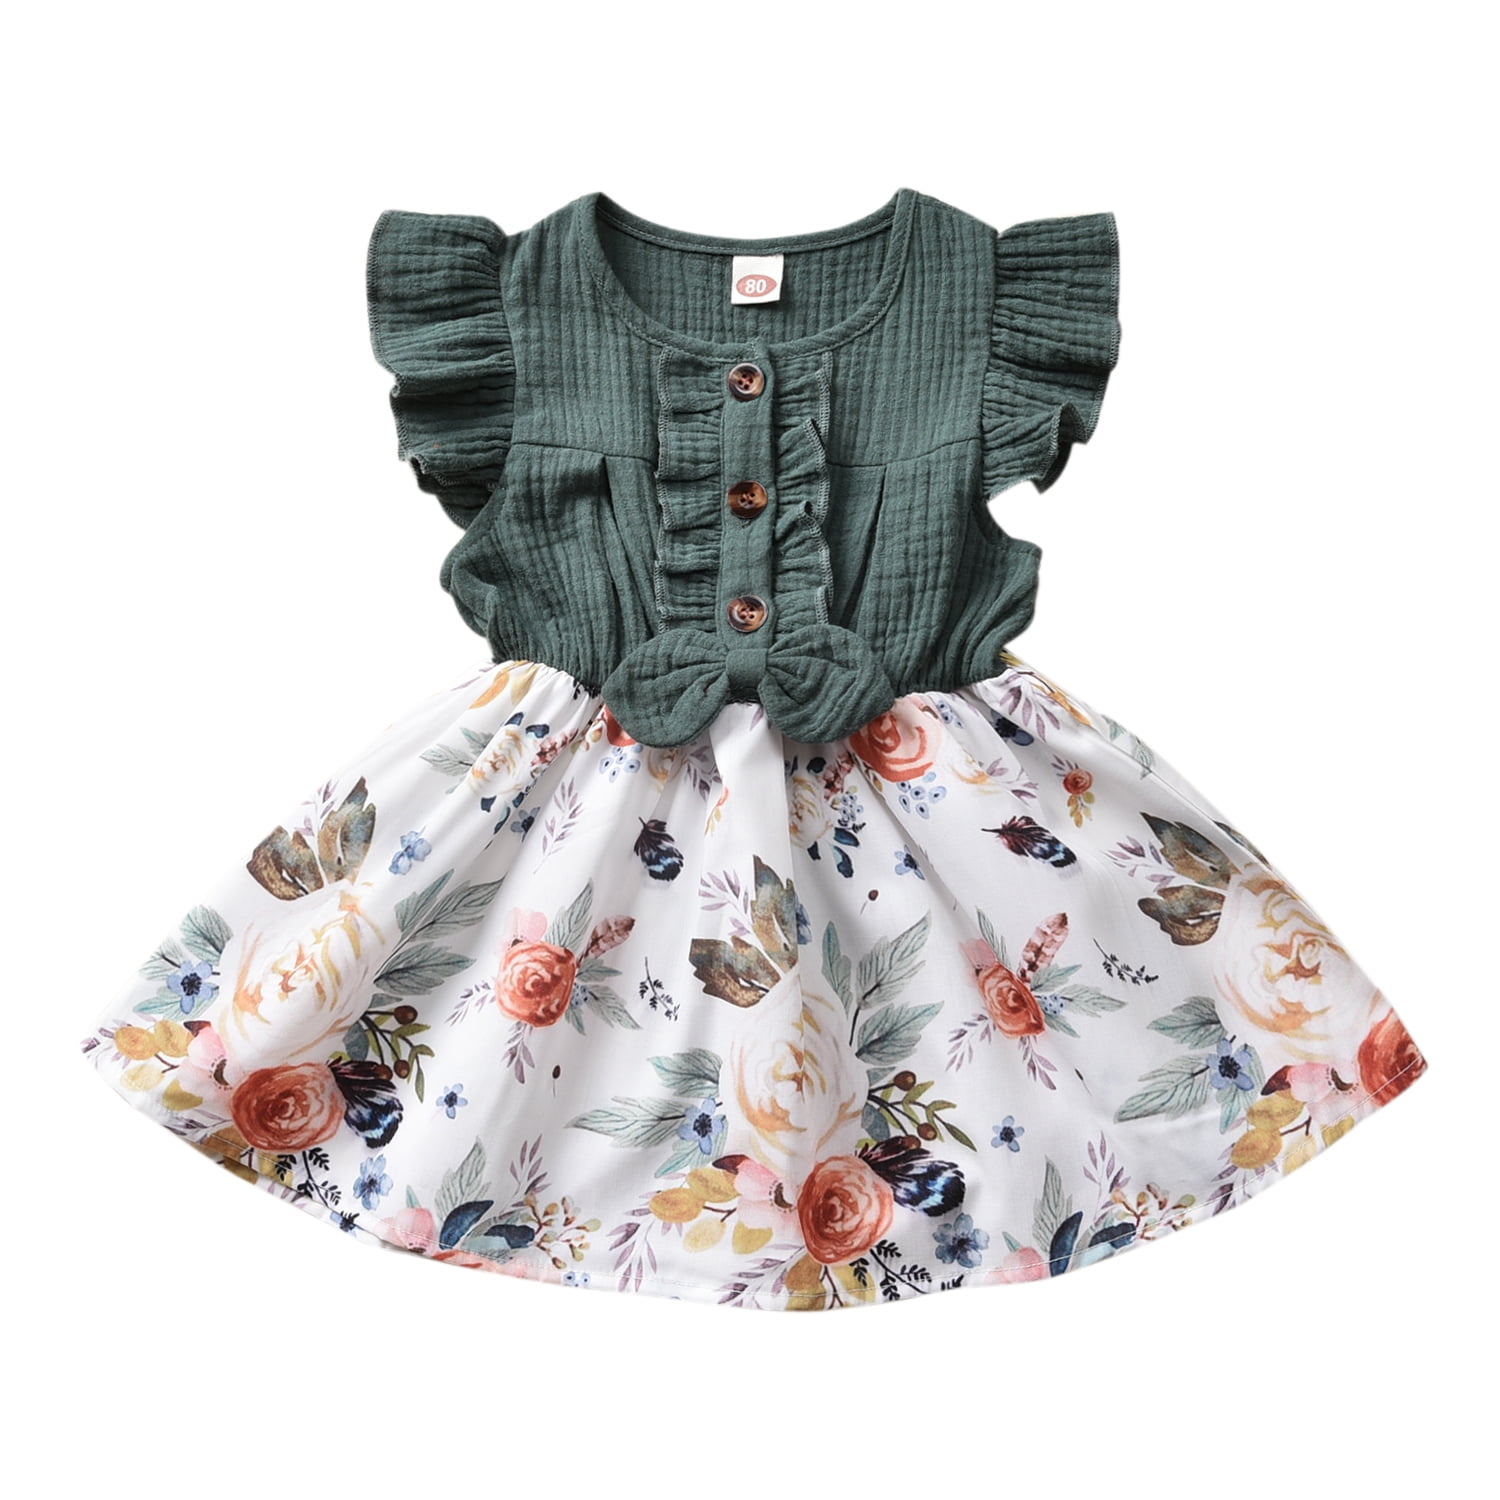 Toddler Baby Girls Floral Dress Princess Ruffled Sundress Clothes Party Casual 